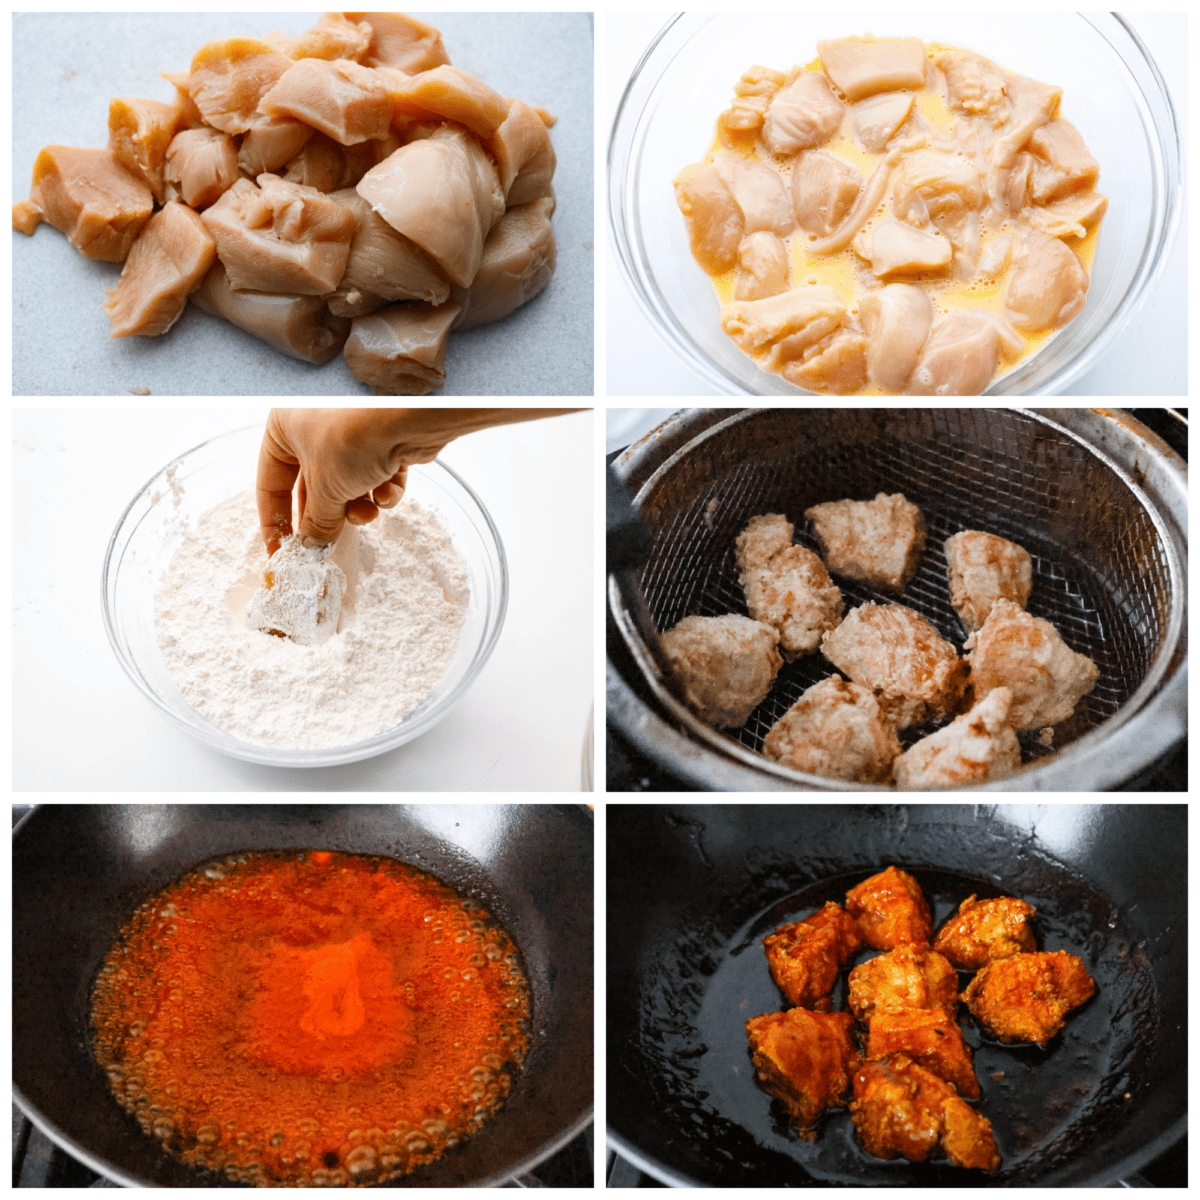 6-photo collage of the chicken pieces being battered and fried.